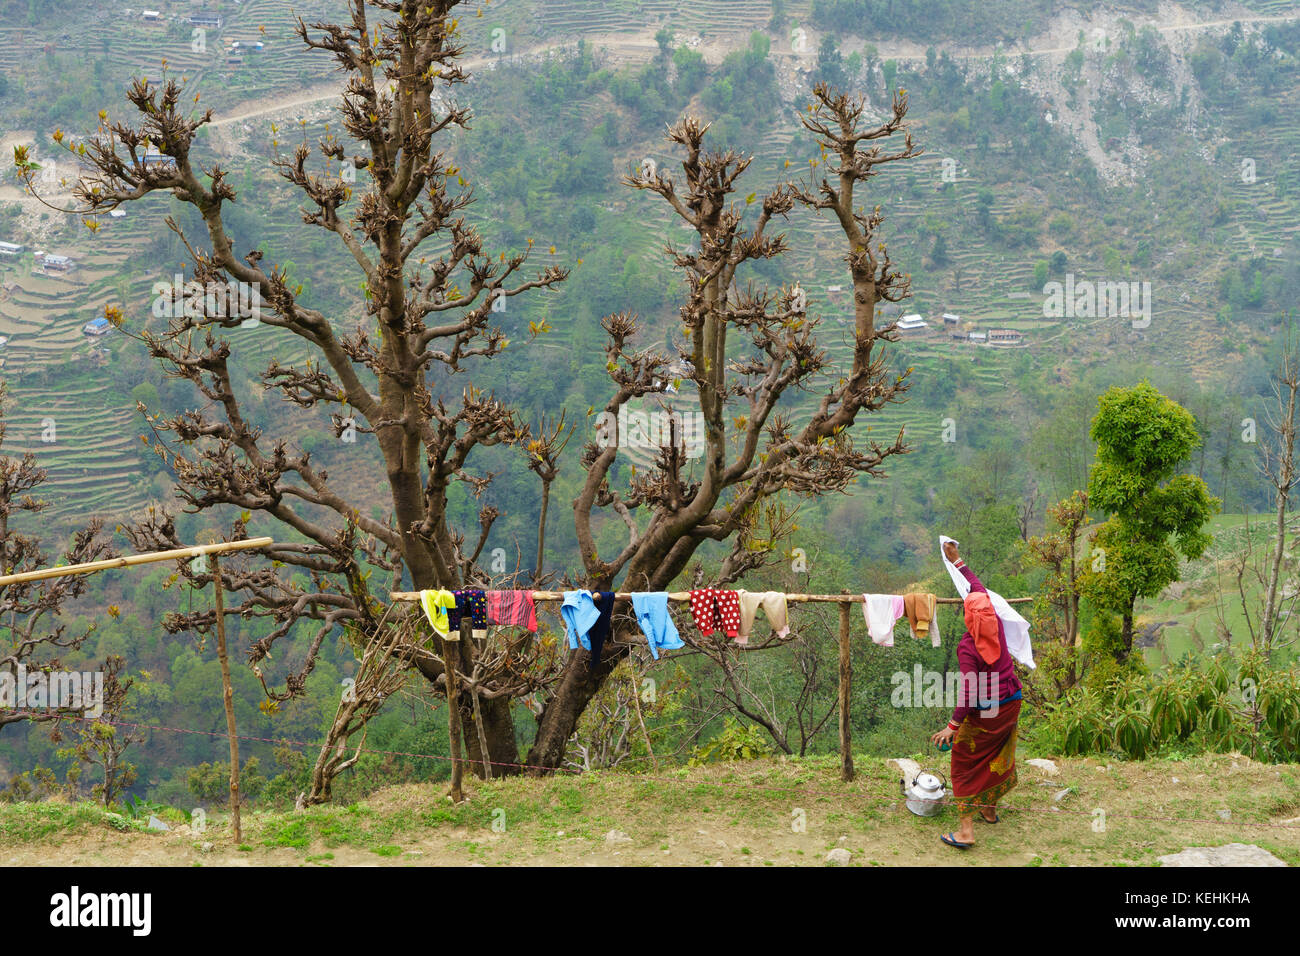 Nepalese woman hanging laundry on a wooden pole. Stock Photo